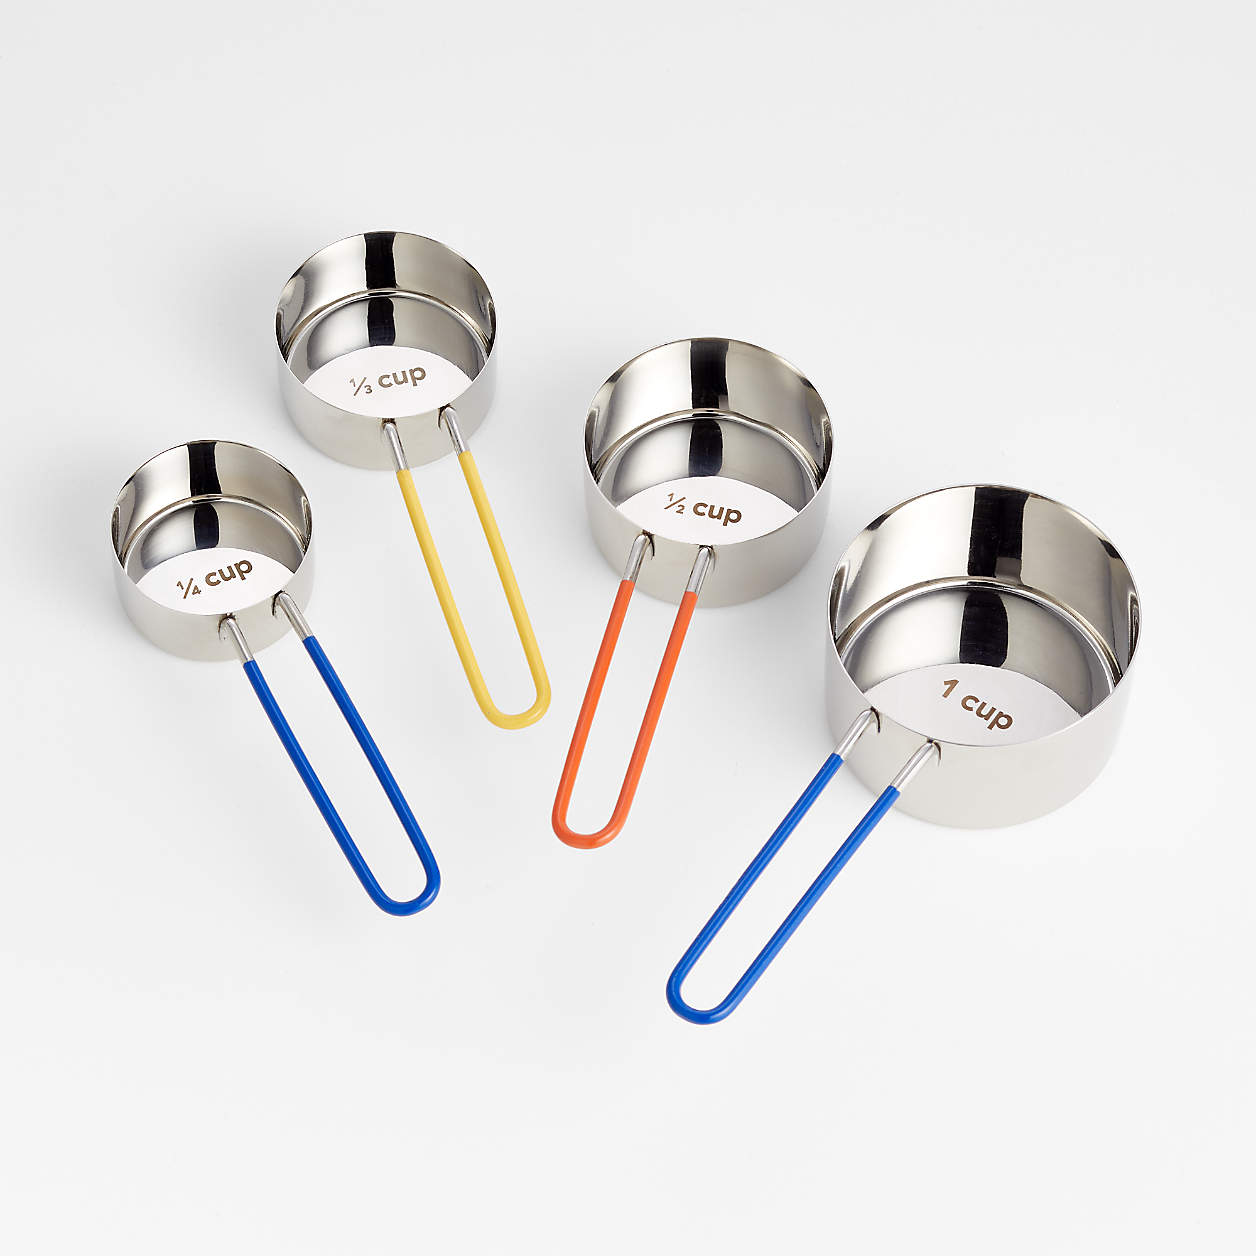 Stainless Steel Measuring Cups by Molly Baz